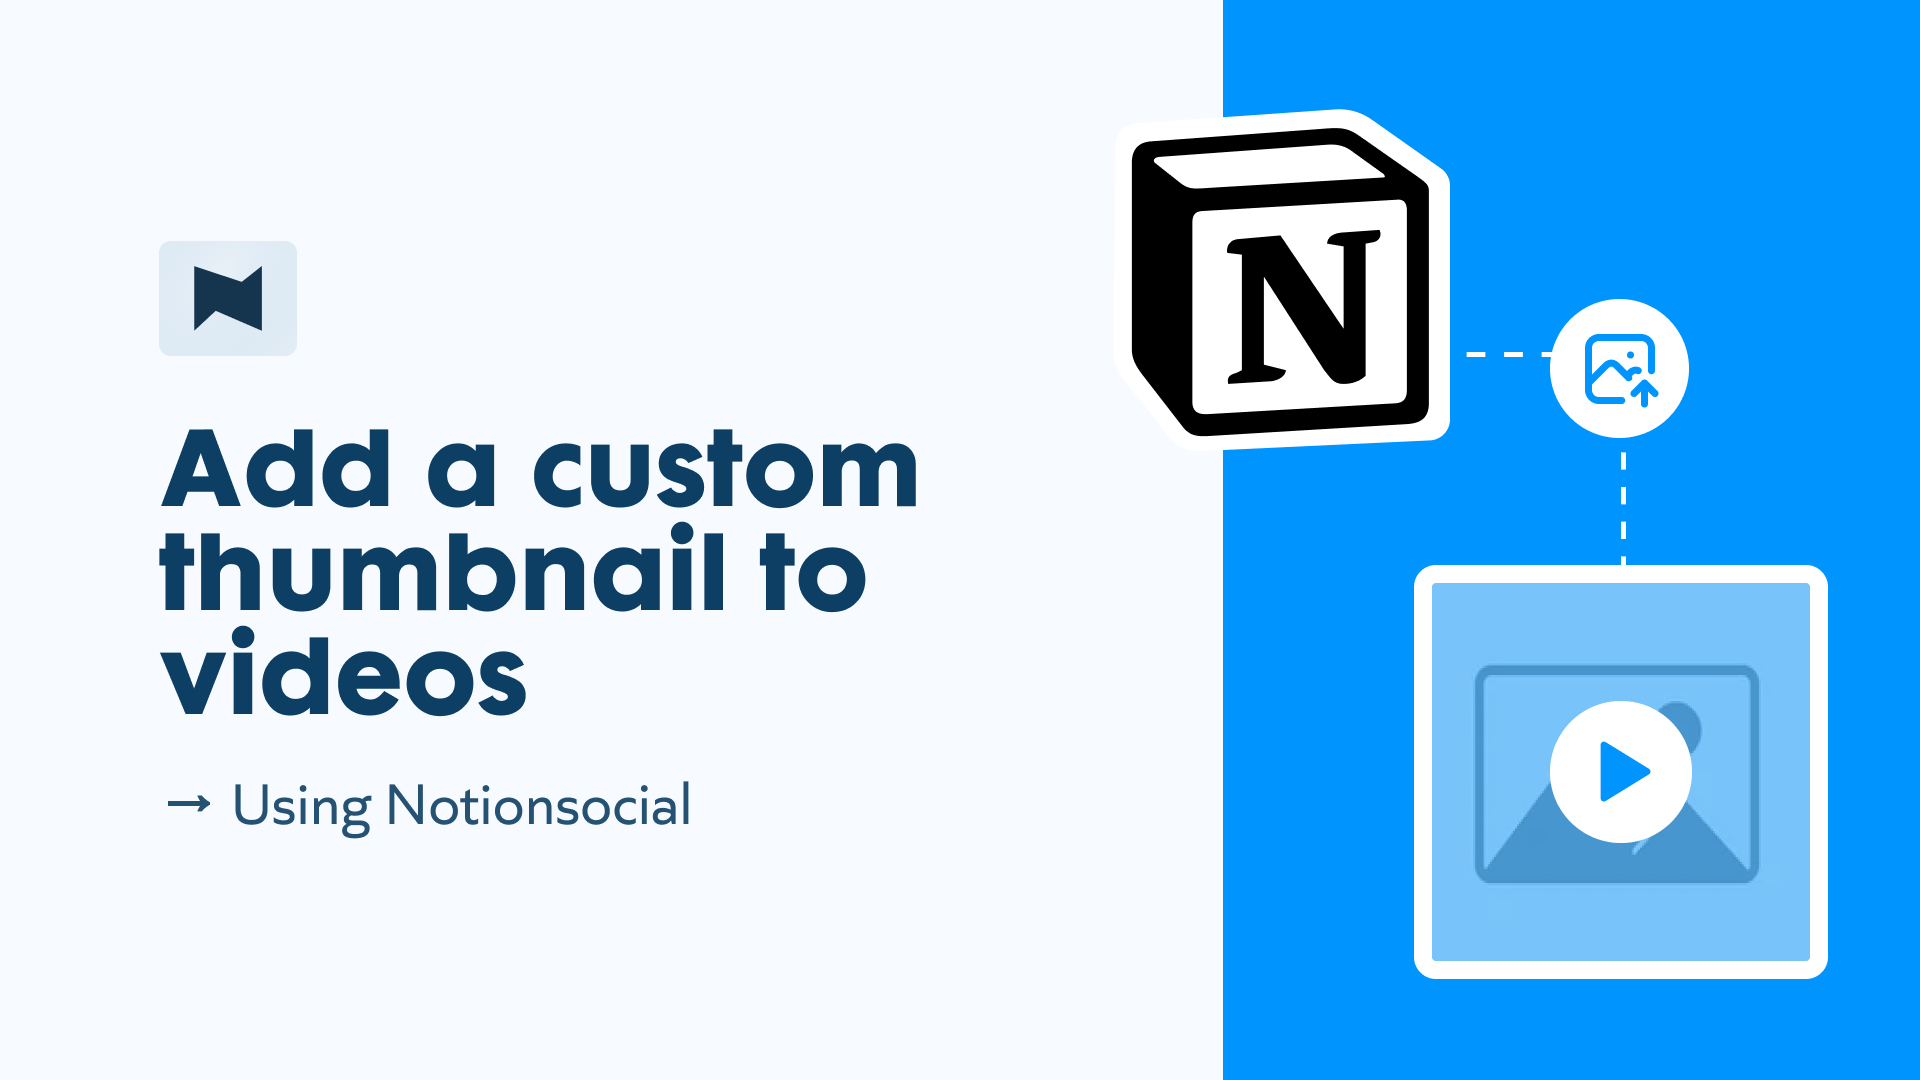 How to add a custom thumbnail to videos using Notionsocial